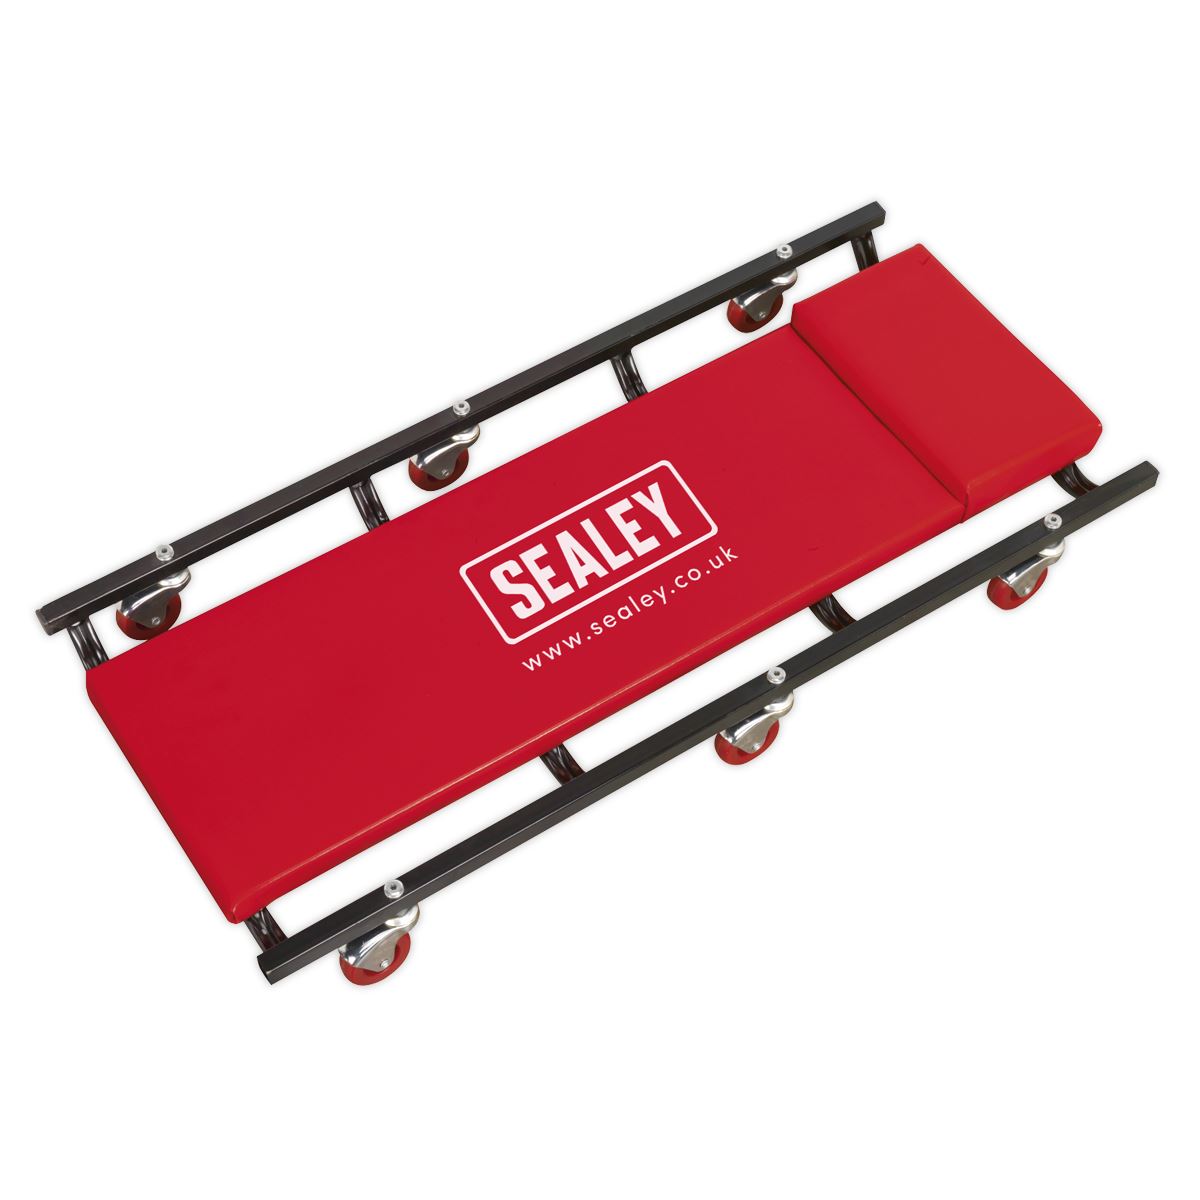 Sealey American-Style Deluxe Creeper with Steel Frame & 6 Wheels 36" - Red